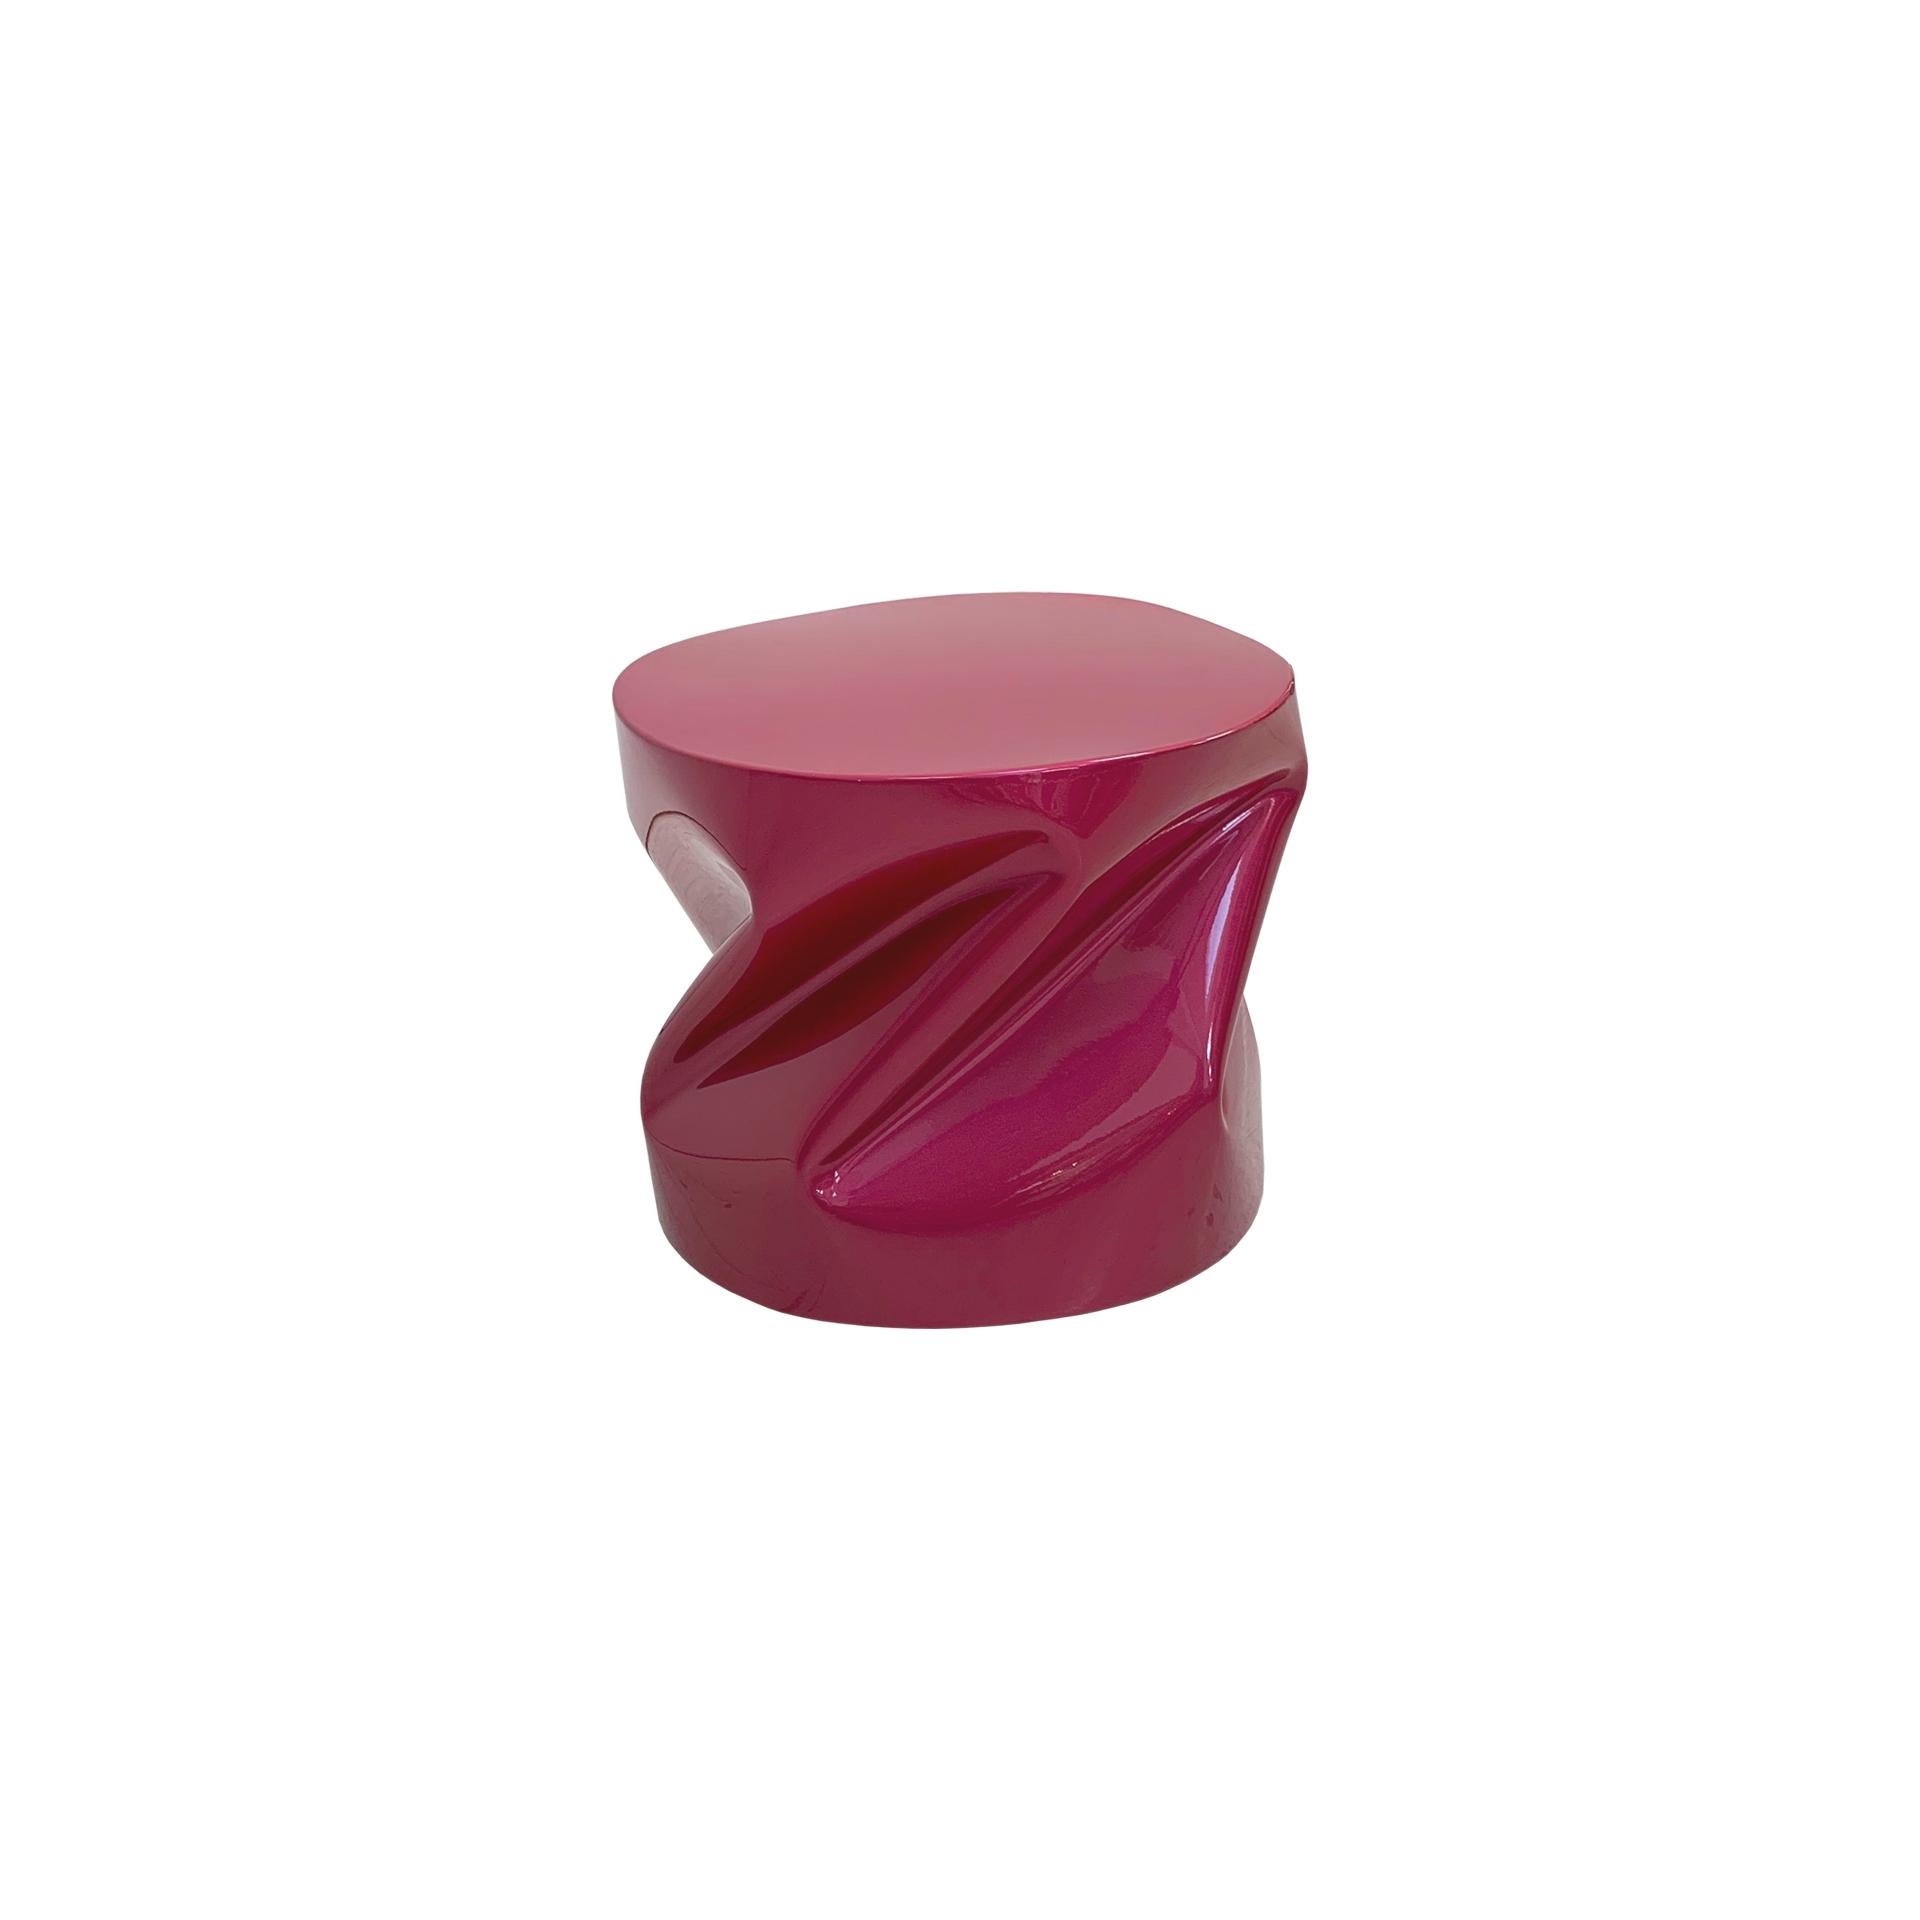 Made by a metal craftsman and oven lacquered in hot pink. It can be used as a stool or a side table.